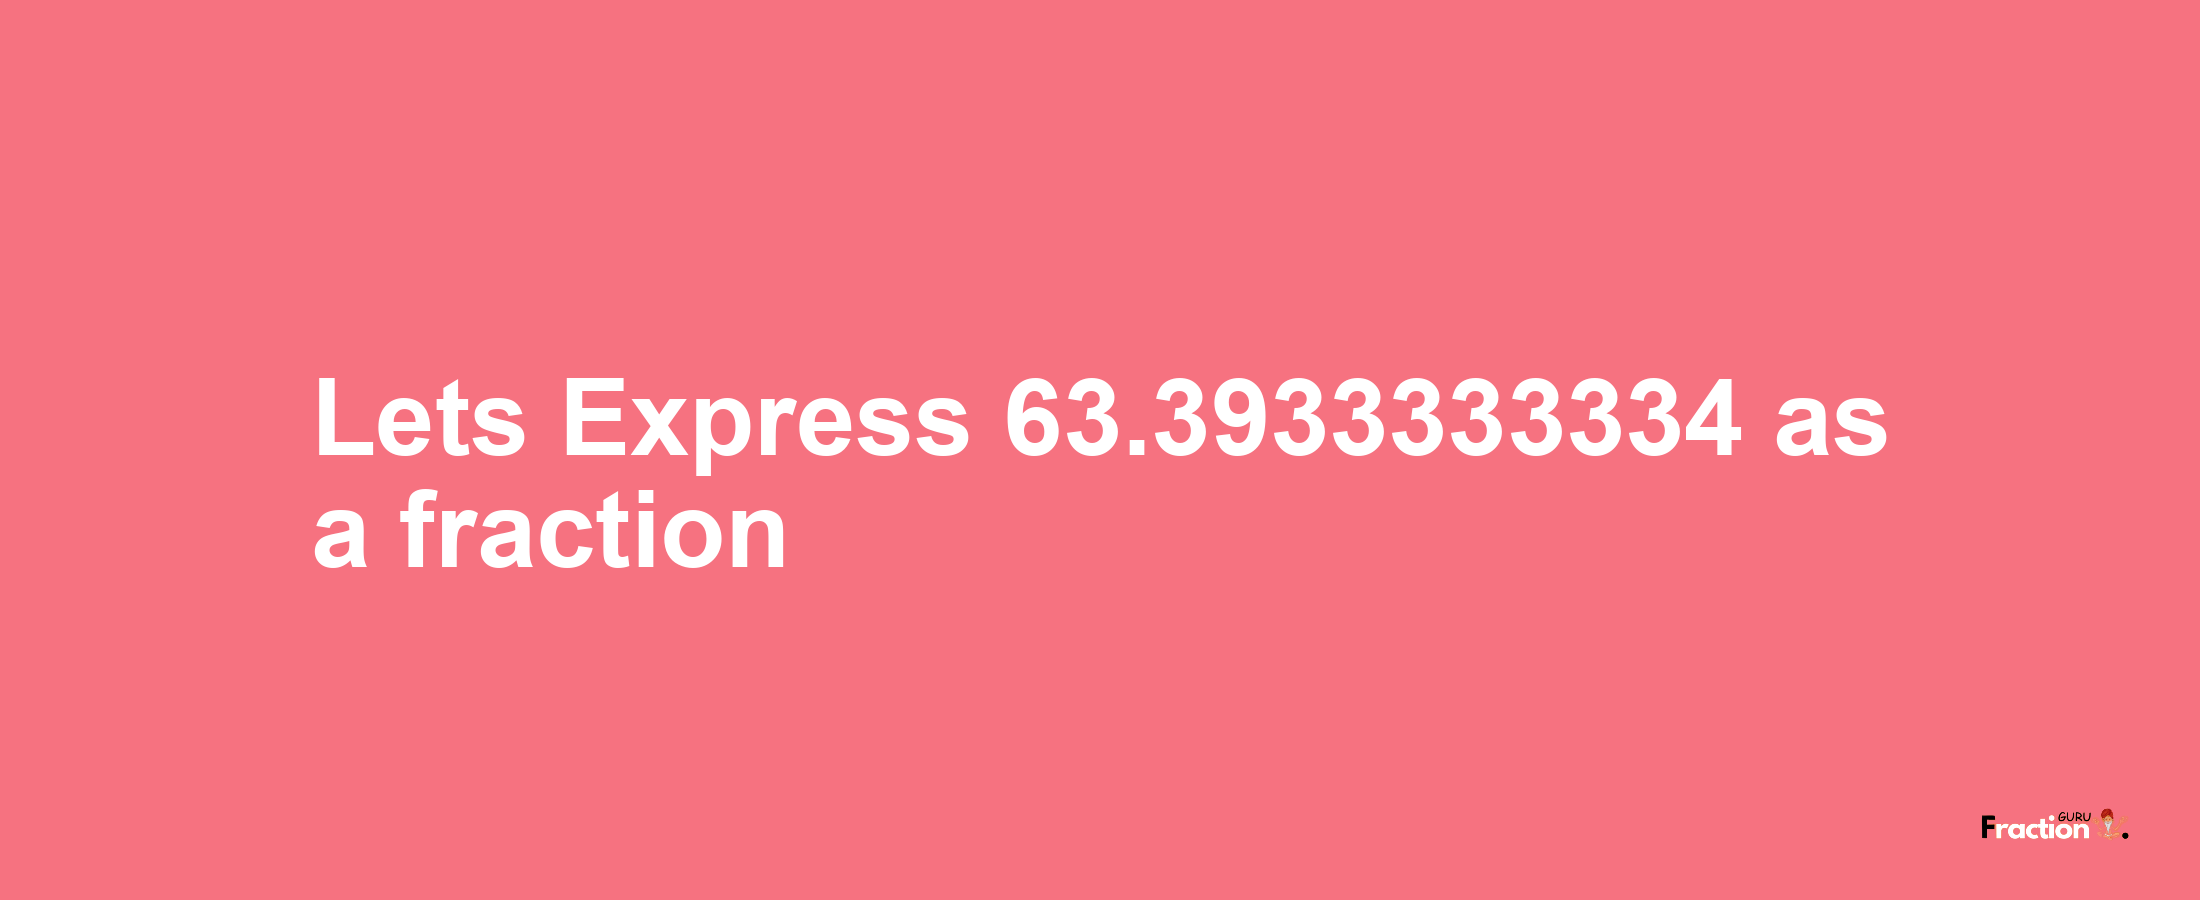 Lets Express 63.3933333334 as afraction